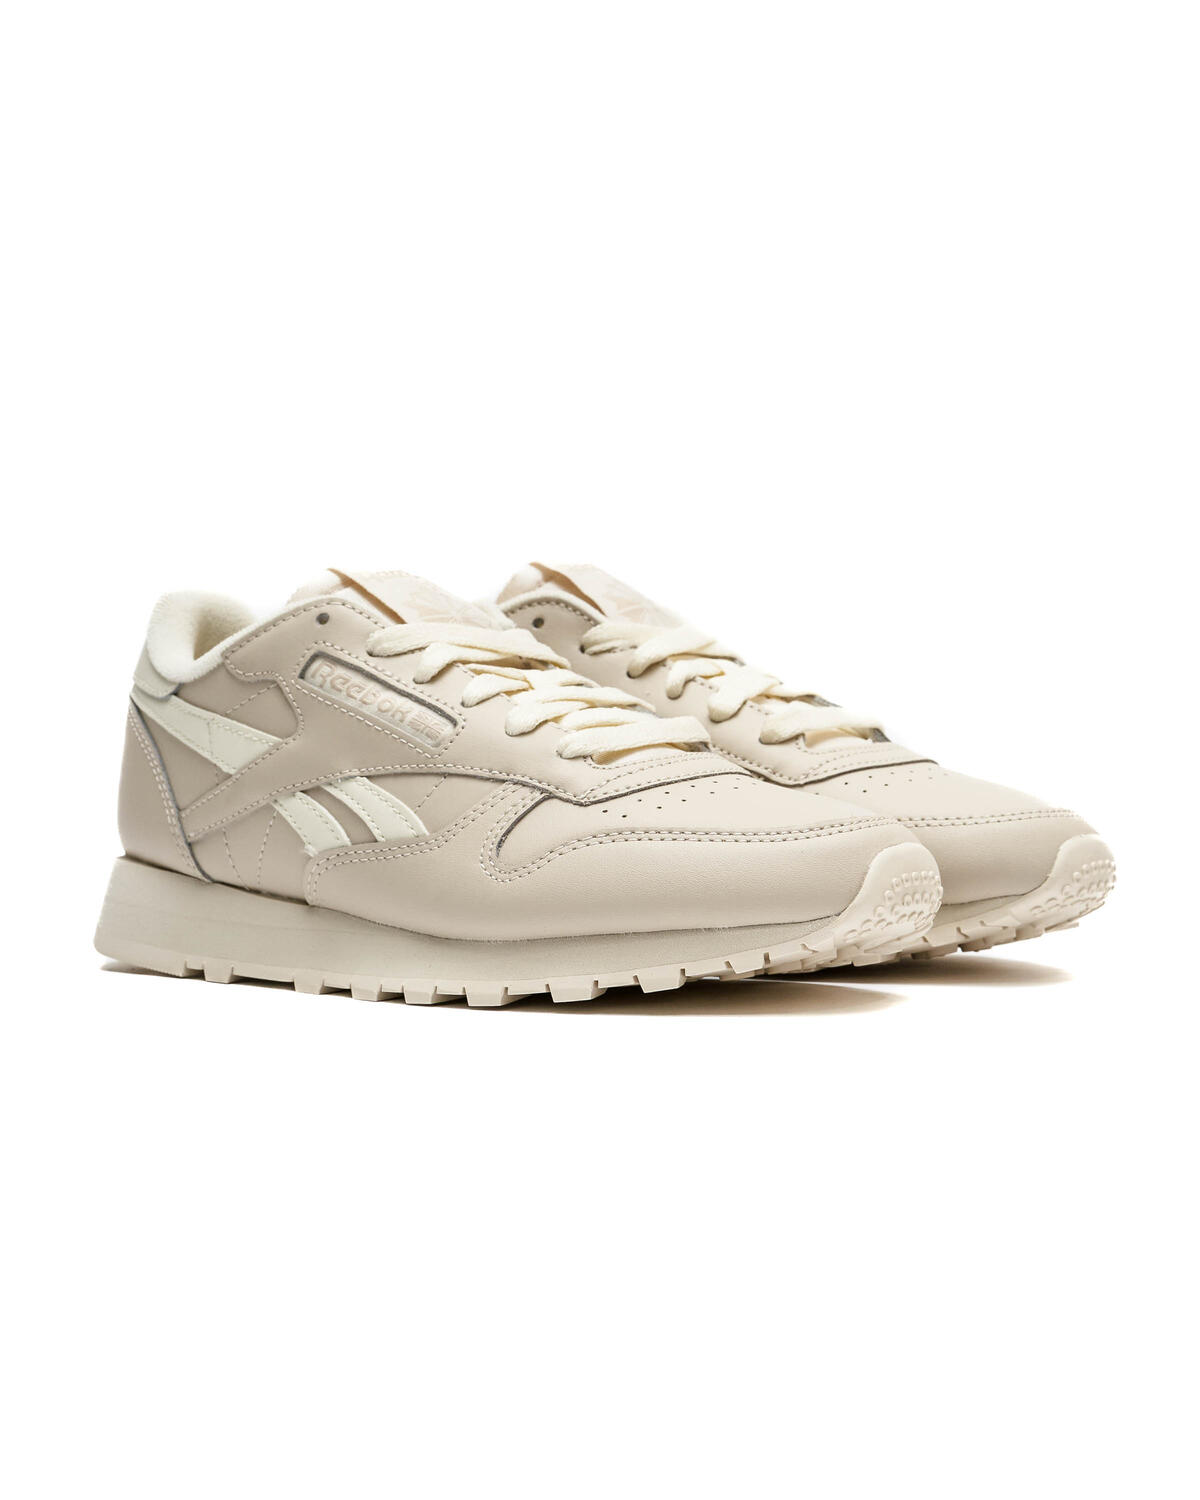 | Reebok AFEW LEATHER | CLASSIC STORE WMNS IG9481